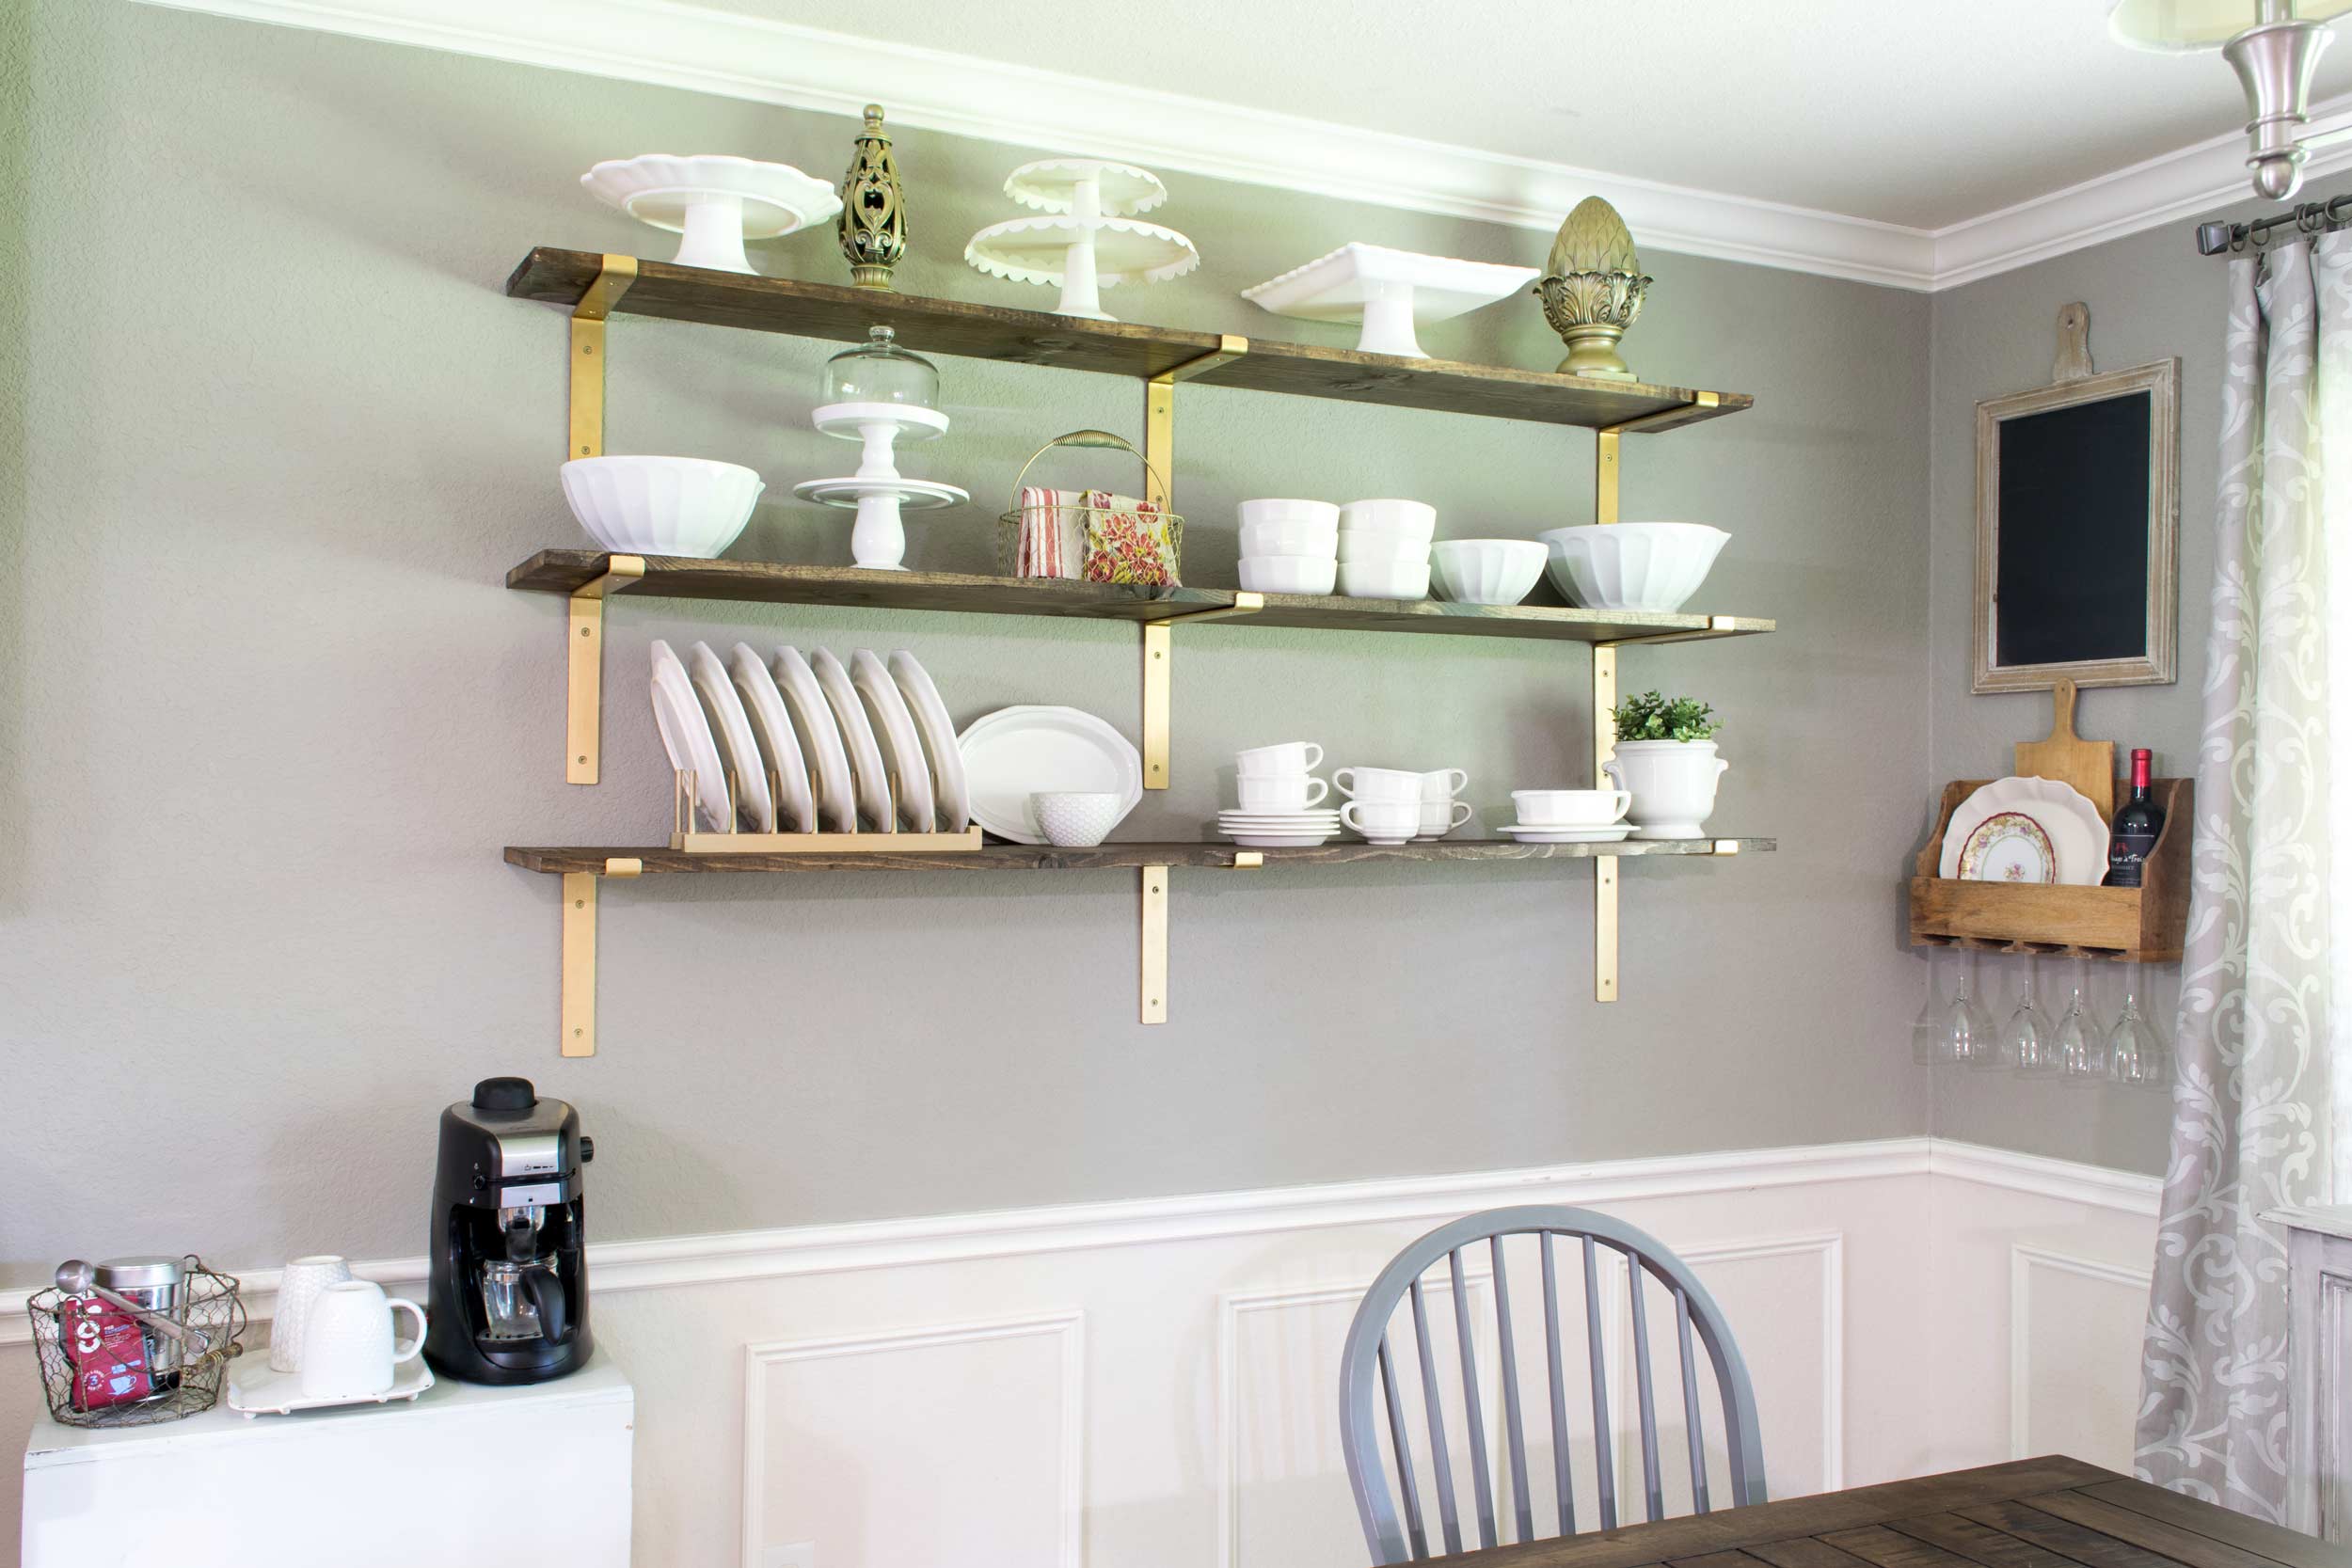 Dining room shelves add more room to display dishes. 